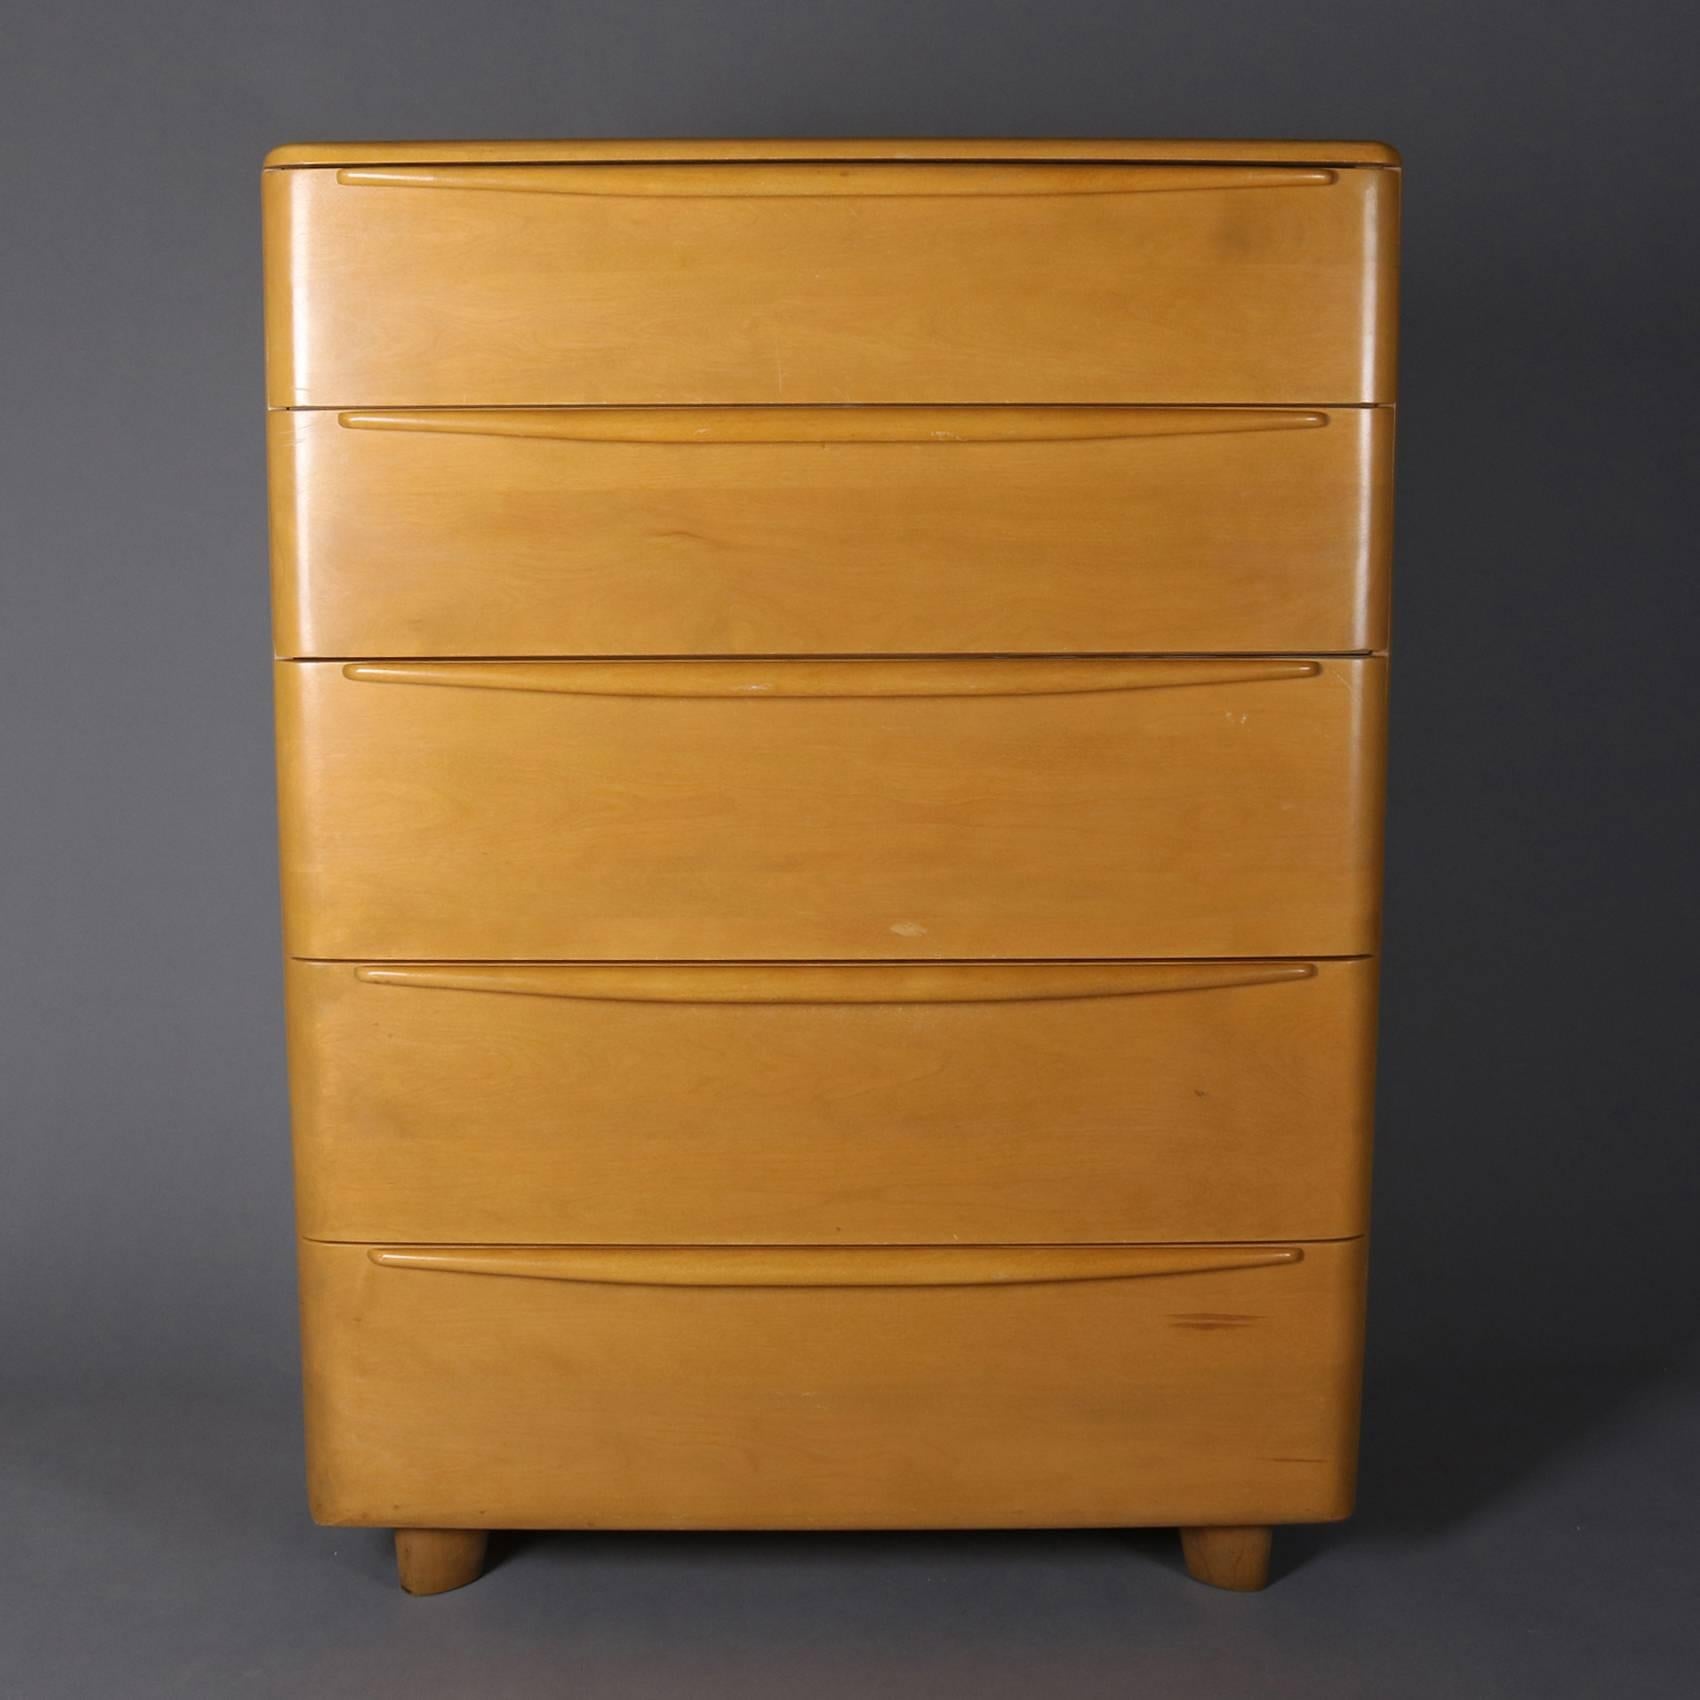 Mid-Century Modern Heywood-Wakefield Encore dresser chest of drawers features yellow birch construction with five drawers in Wheat finish, en verso maker and finish stamp, 20th century

Measures: 46" H x 34" W x 20" D.